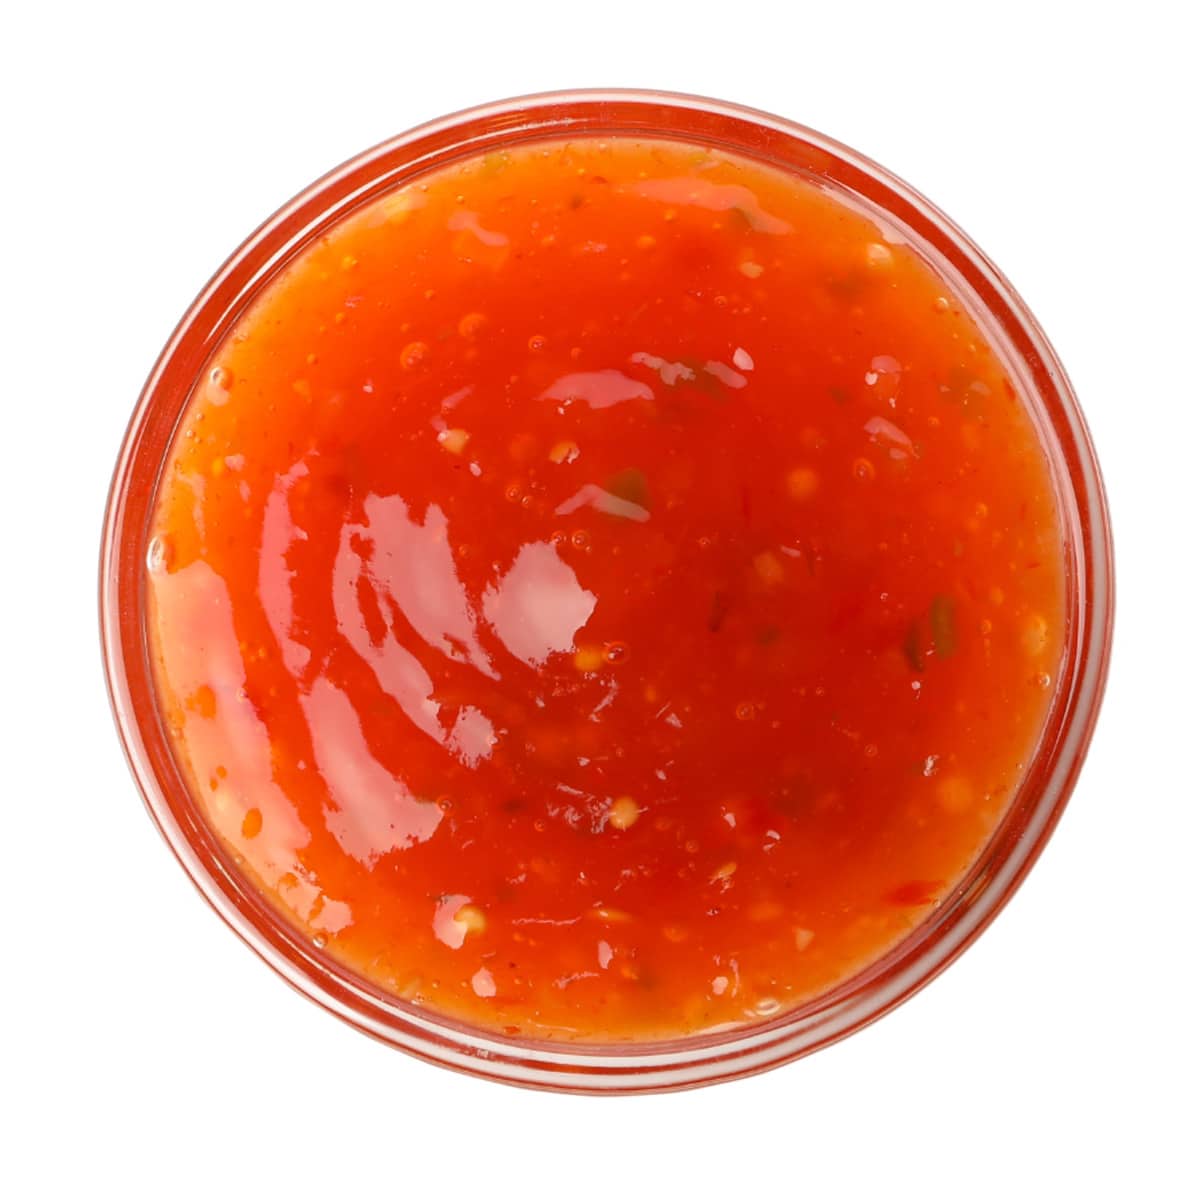 Popeyes Sweet Heat sauce is a spicy and sweet condiment that packs a punch of flavor in every bite. Made with a blend of cayenne pepper and sweet chili sauce, this sauce adds a fiery kick to any dish it's paired with.